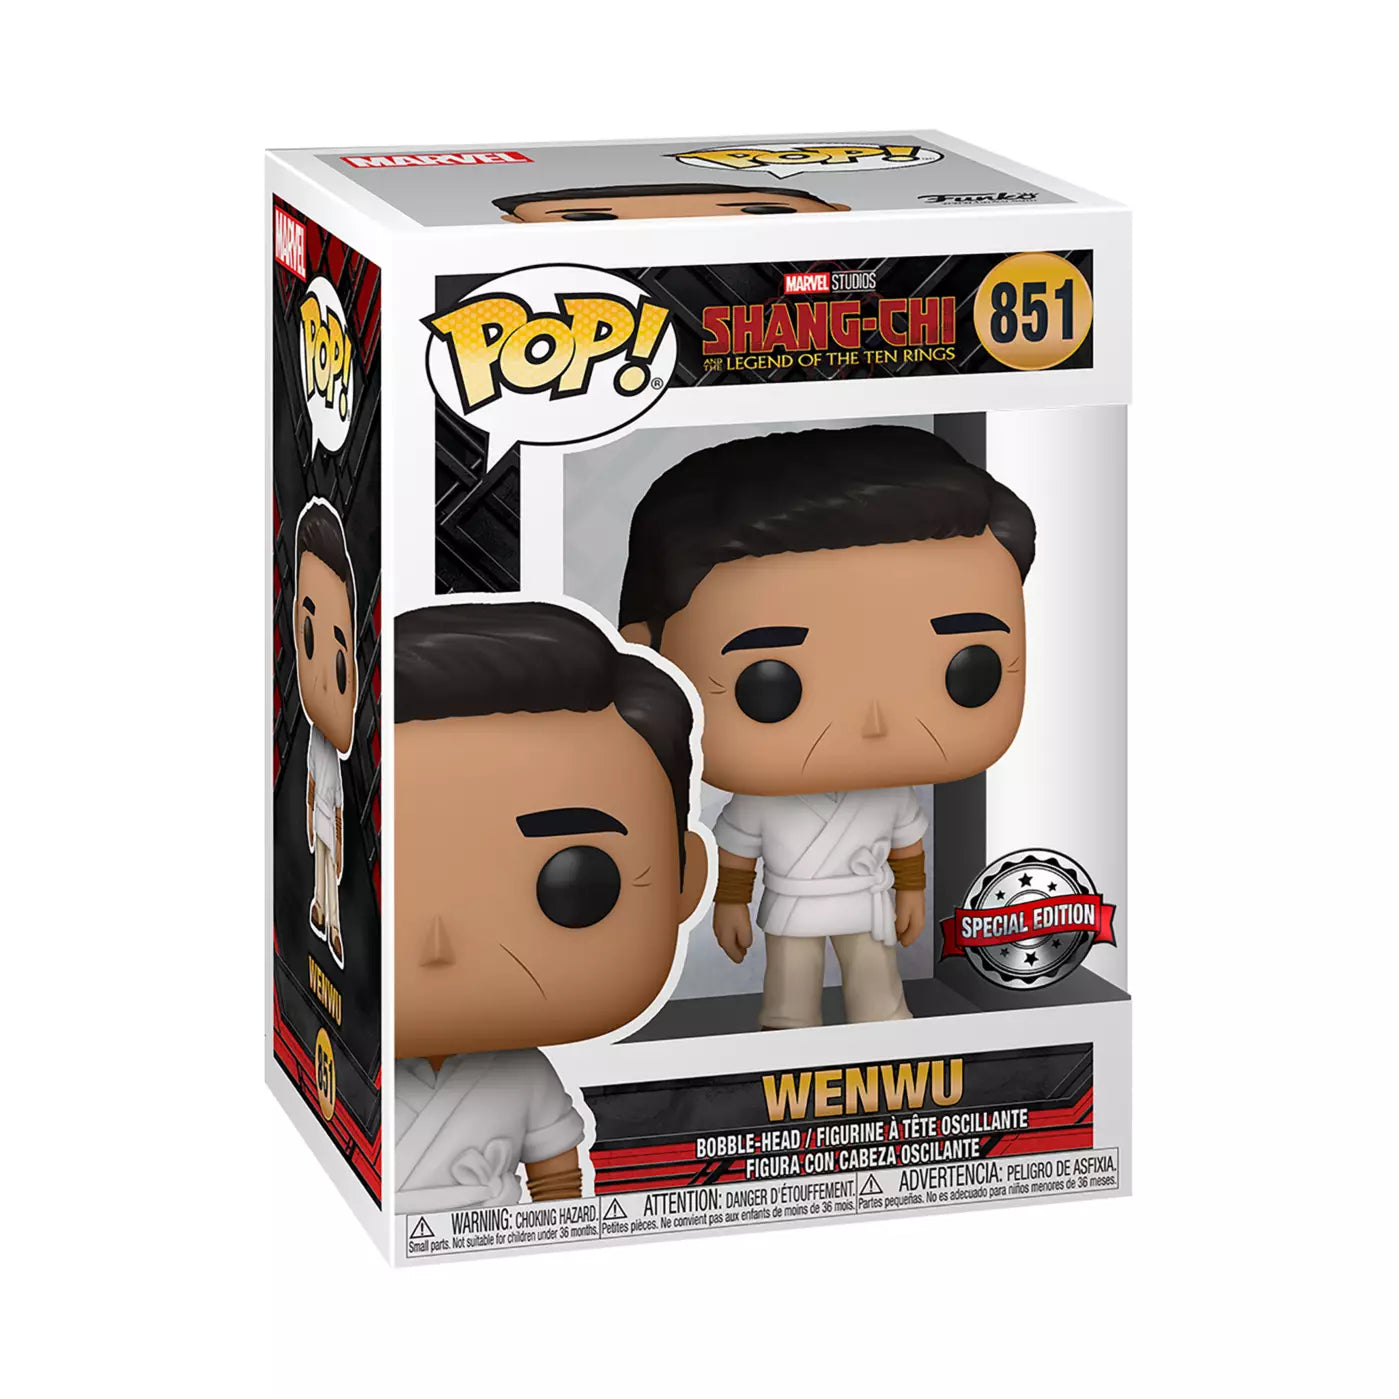 Funko Wenwu Special Edition Pop! Vinyl Figure, Shang-Chi and the Legend of the Ten Rings